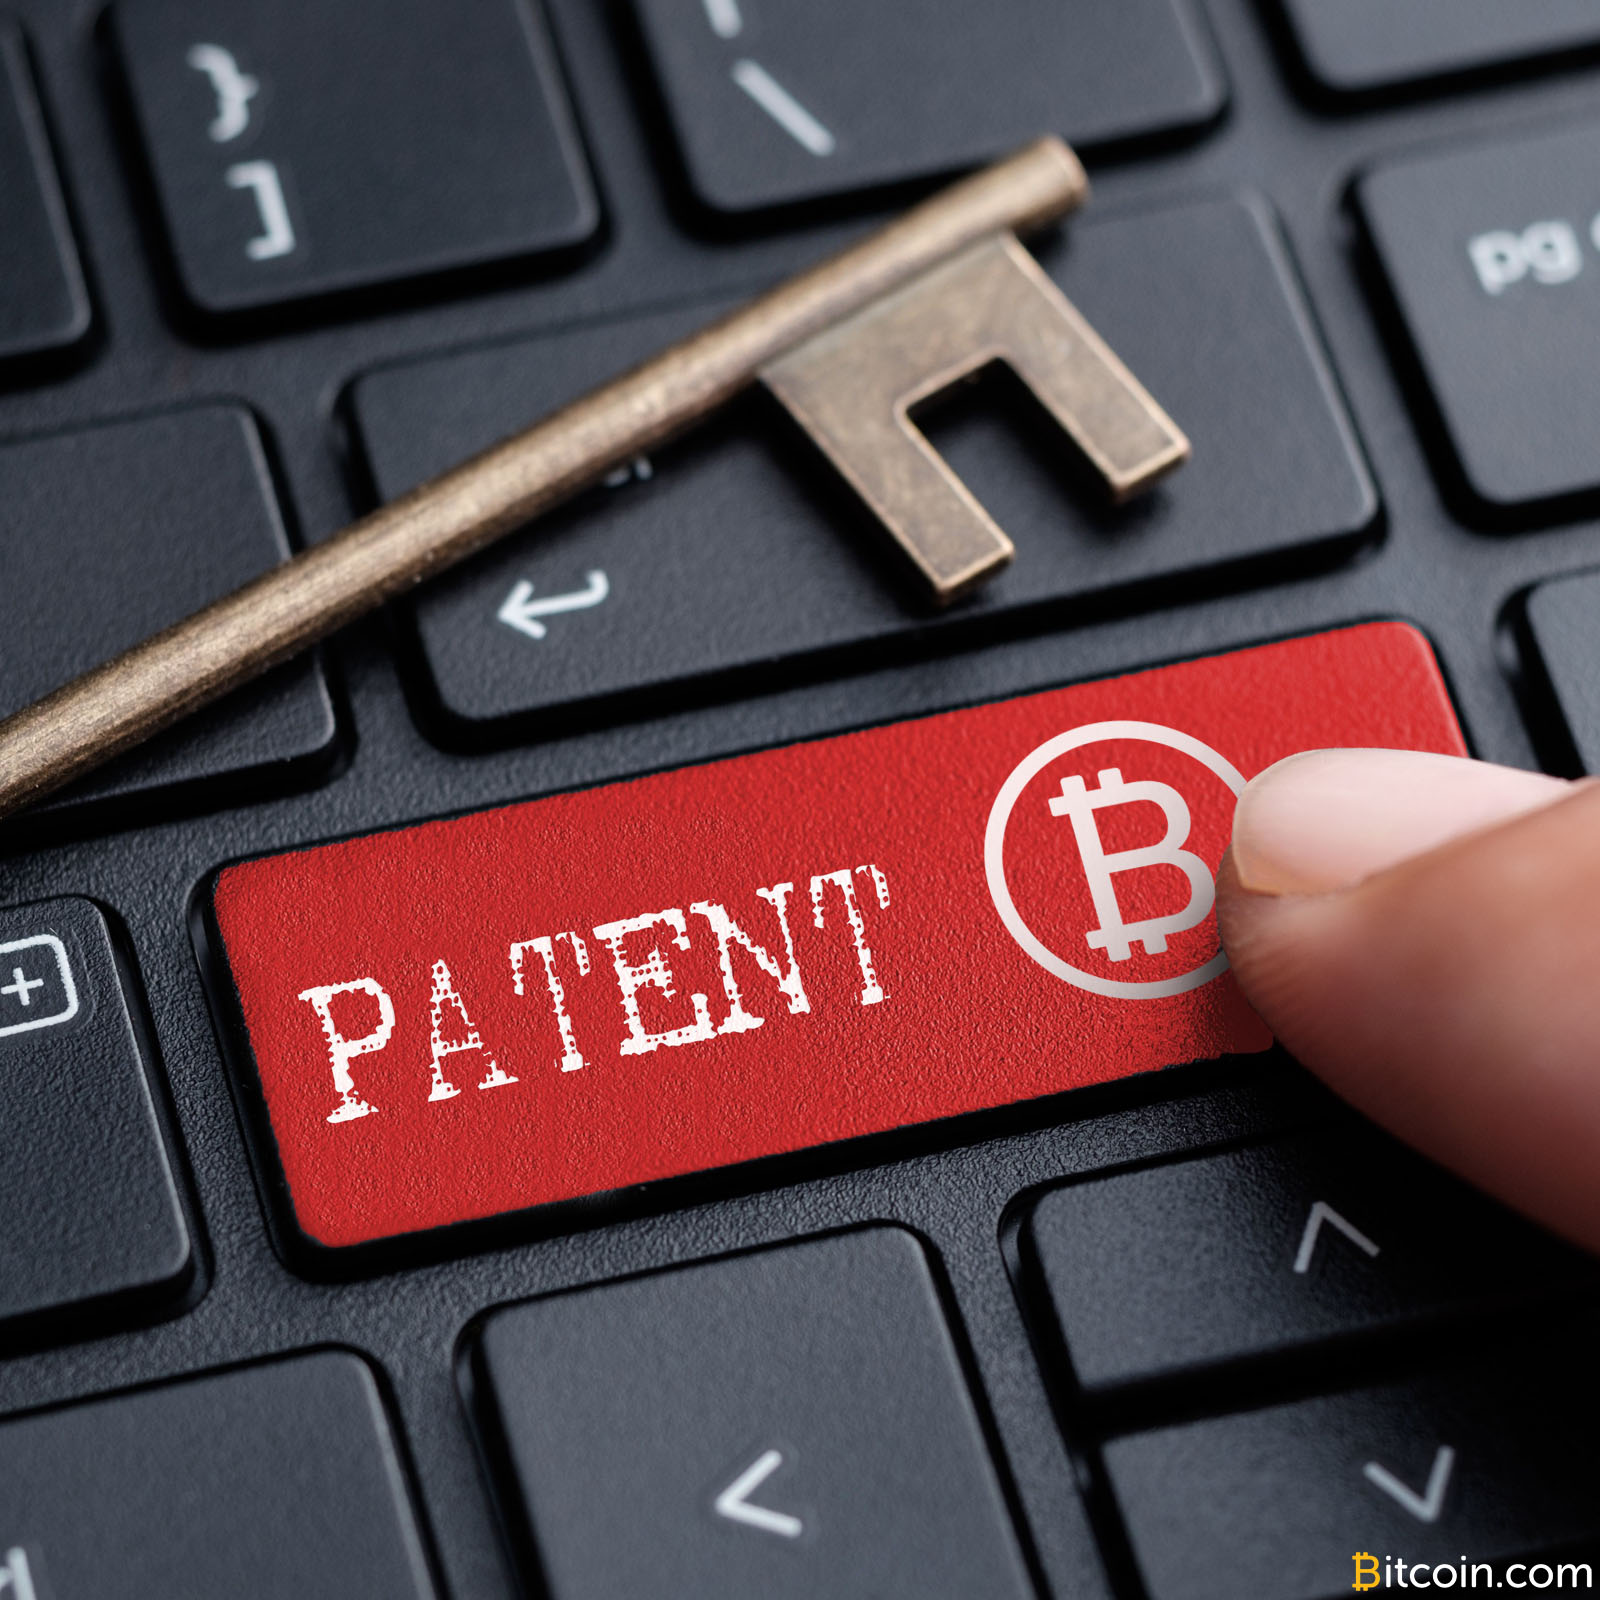 Patent Filing Suggests Bitcoin Exchanges may be Monitored